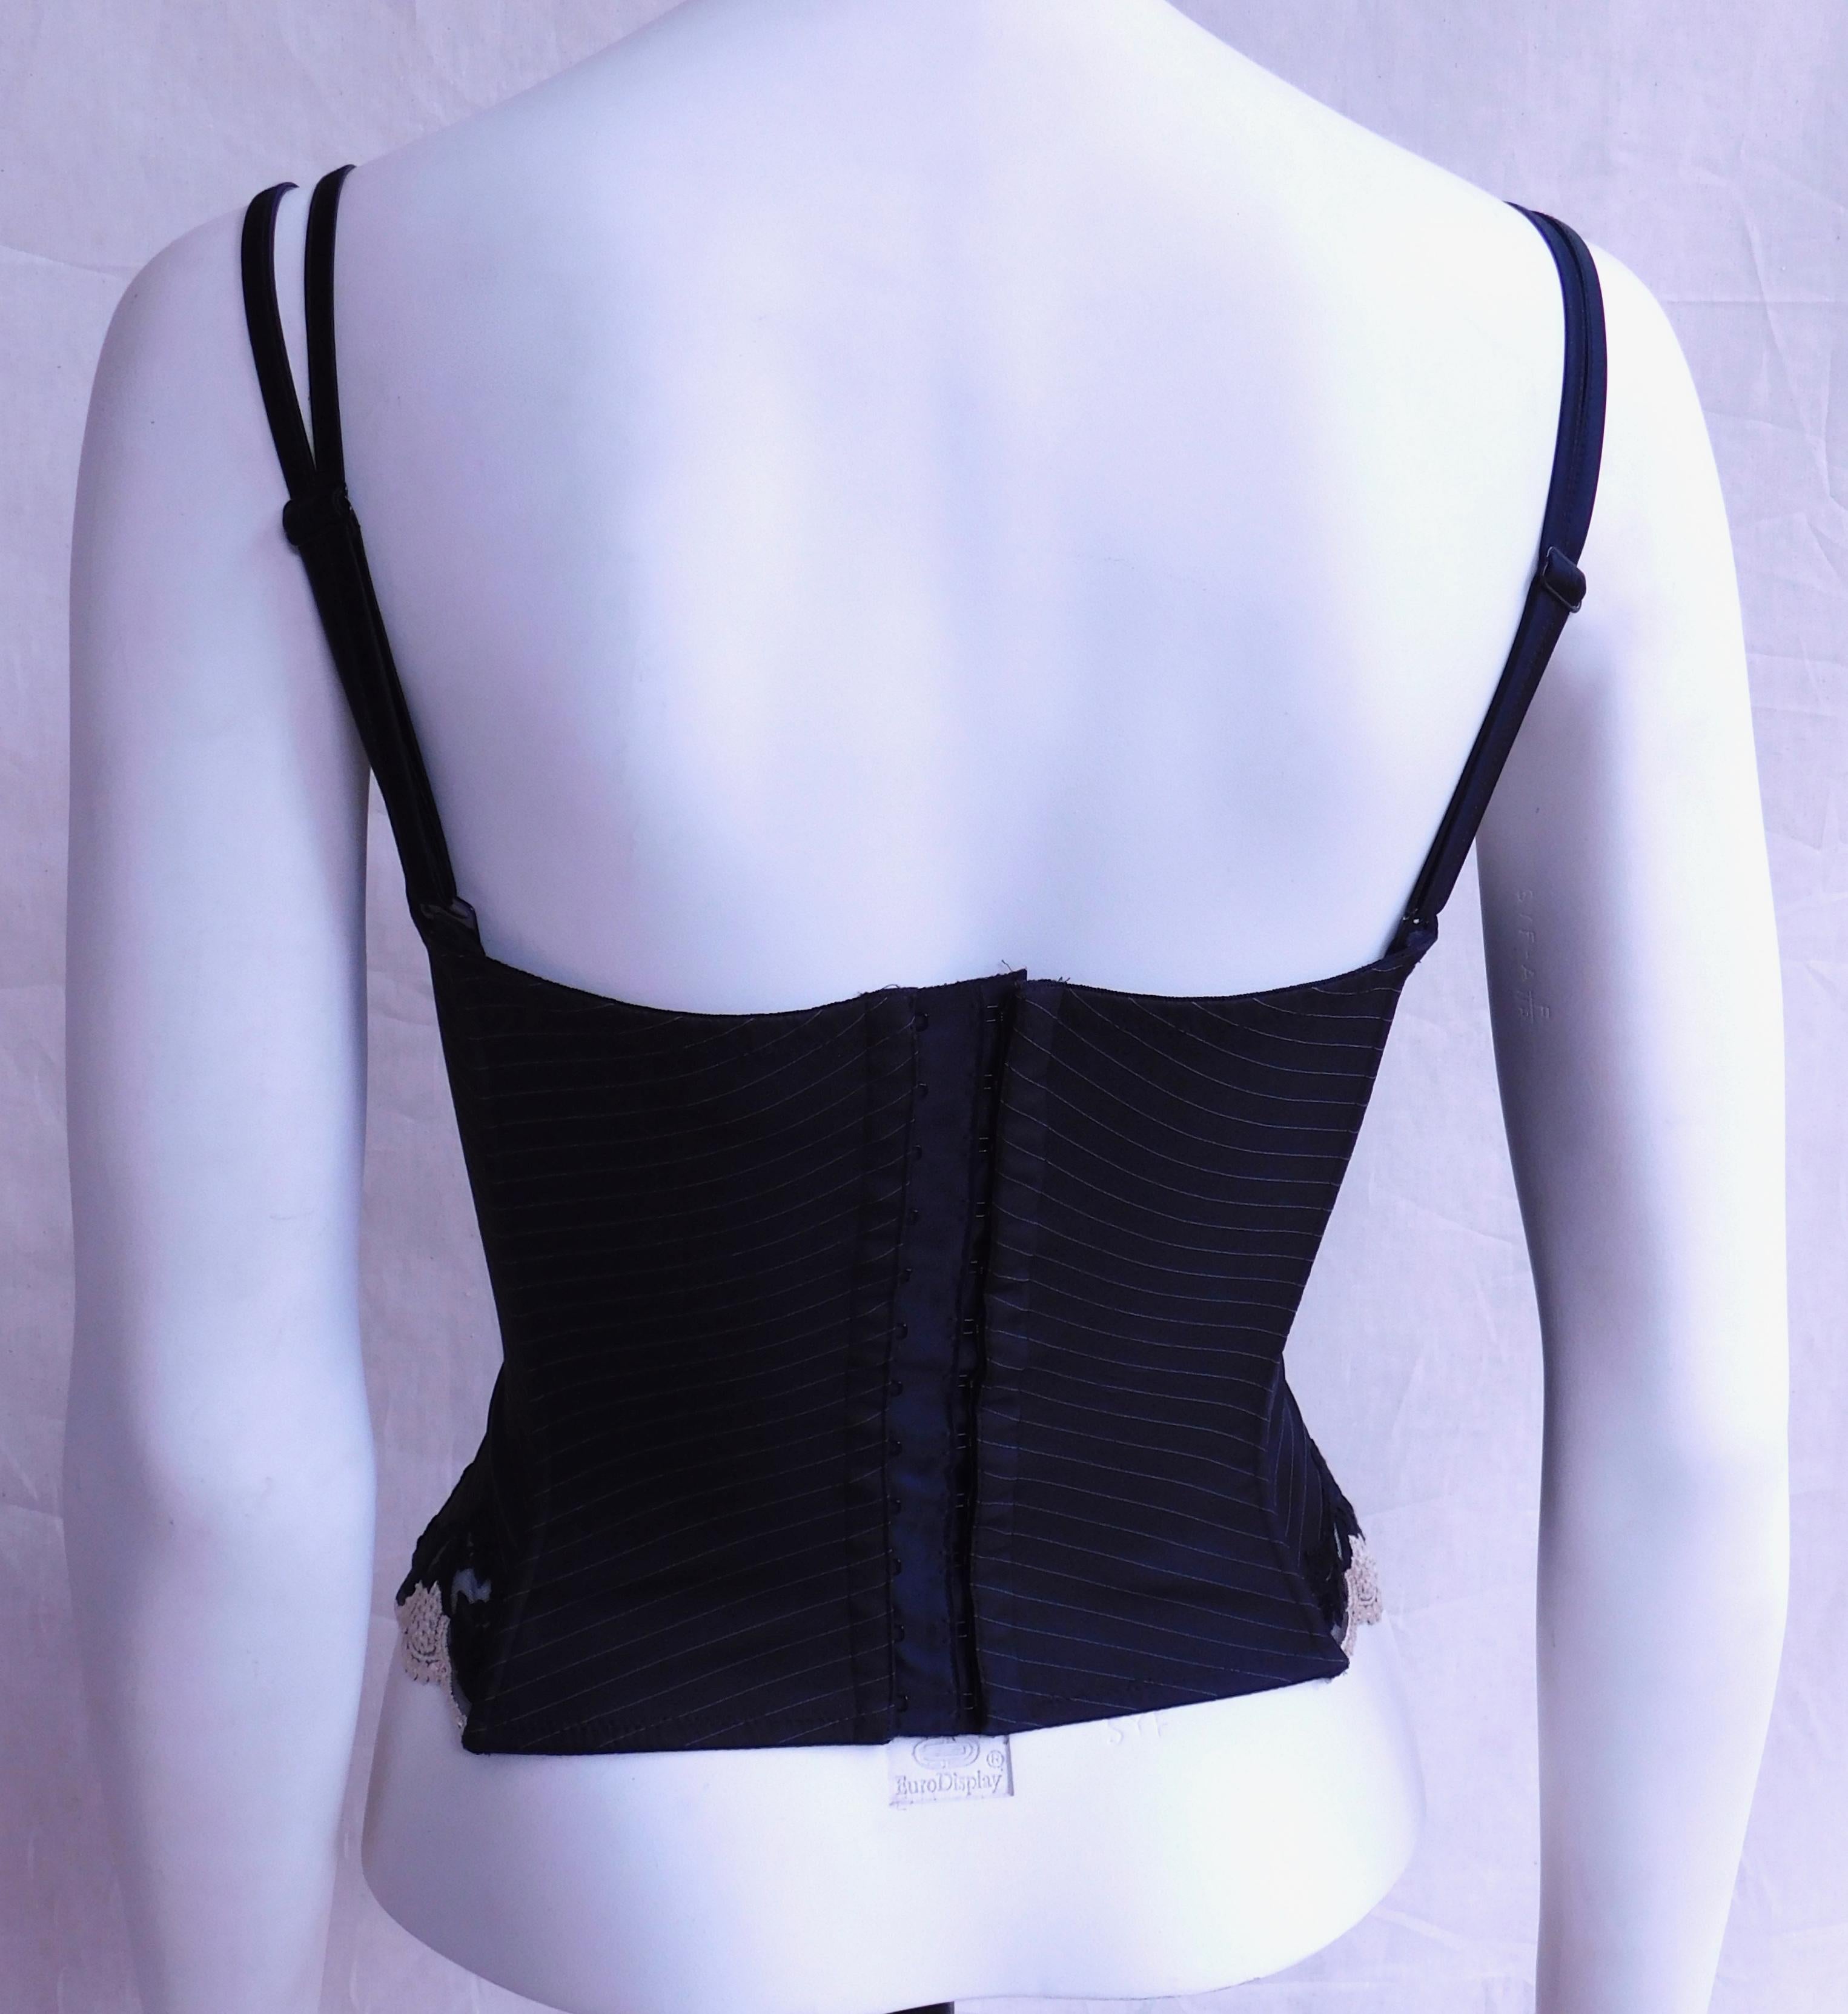 Founded in 1954, Argentovivo is one of Italy's finest designer lingerie and clothing brands and epitomizes Old Hollywood glamor and feminine elegance. 
This bustier is perfect to wear under a jacket or suit for a chic and sexy evening look.
The